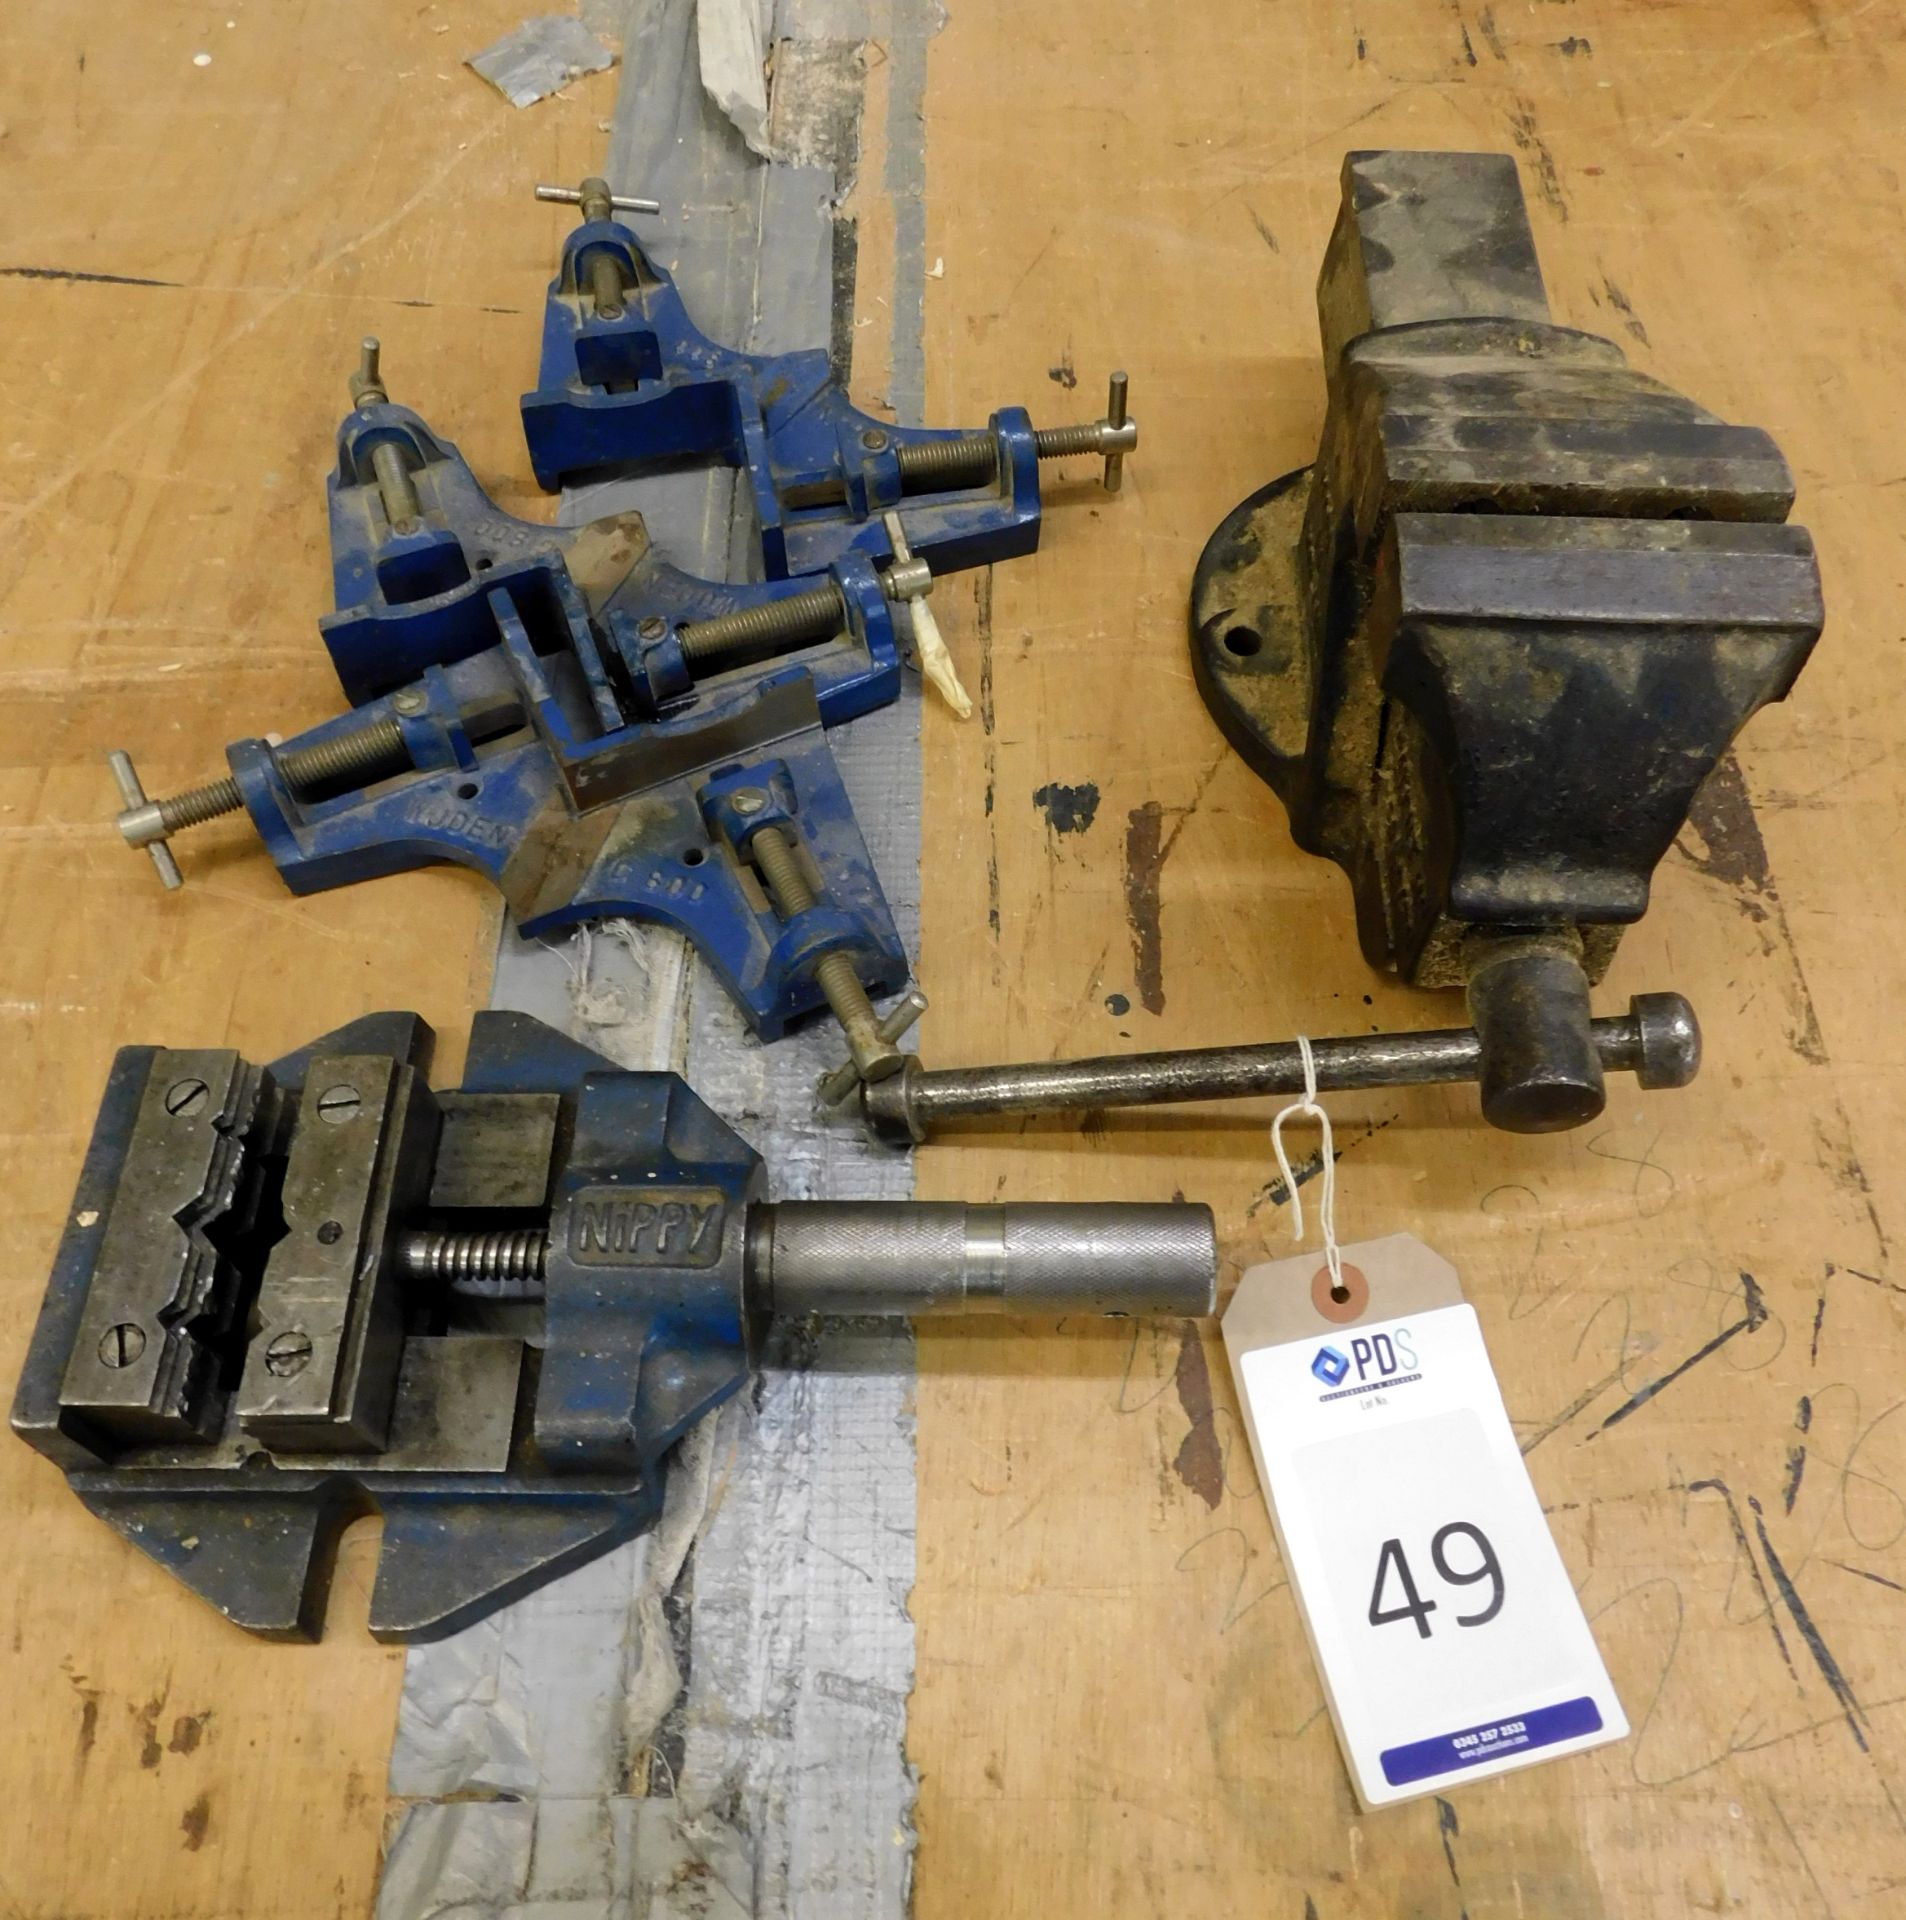 Engineer’s Vice, Nippy Clamp & 3 Woden C800 Corner Clamps (Located Bethnal Green – Please see